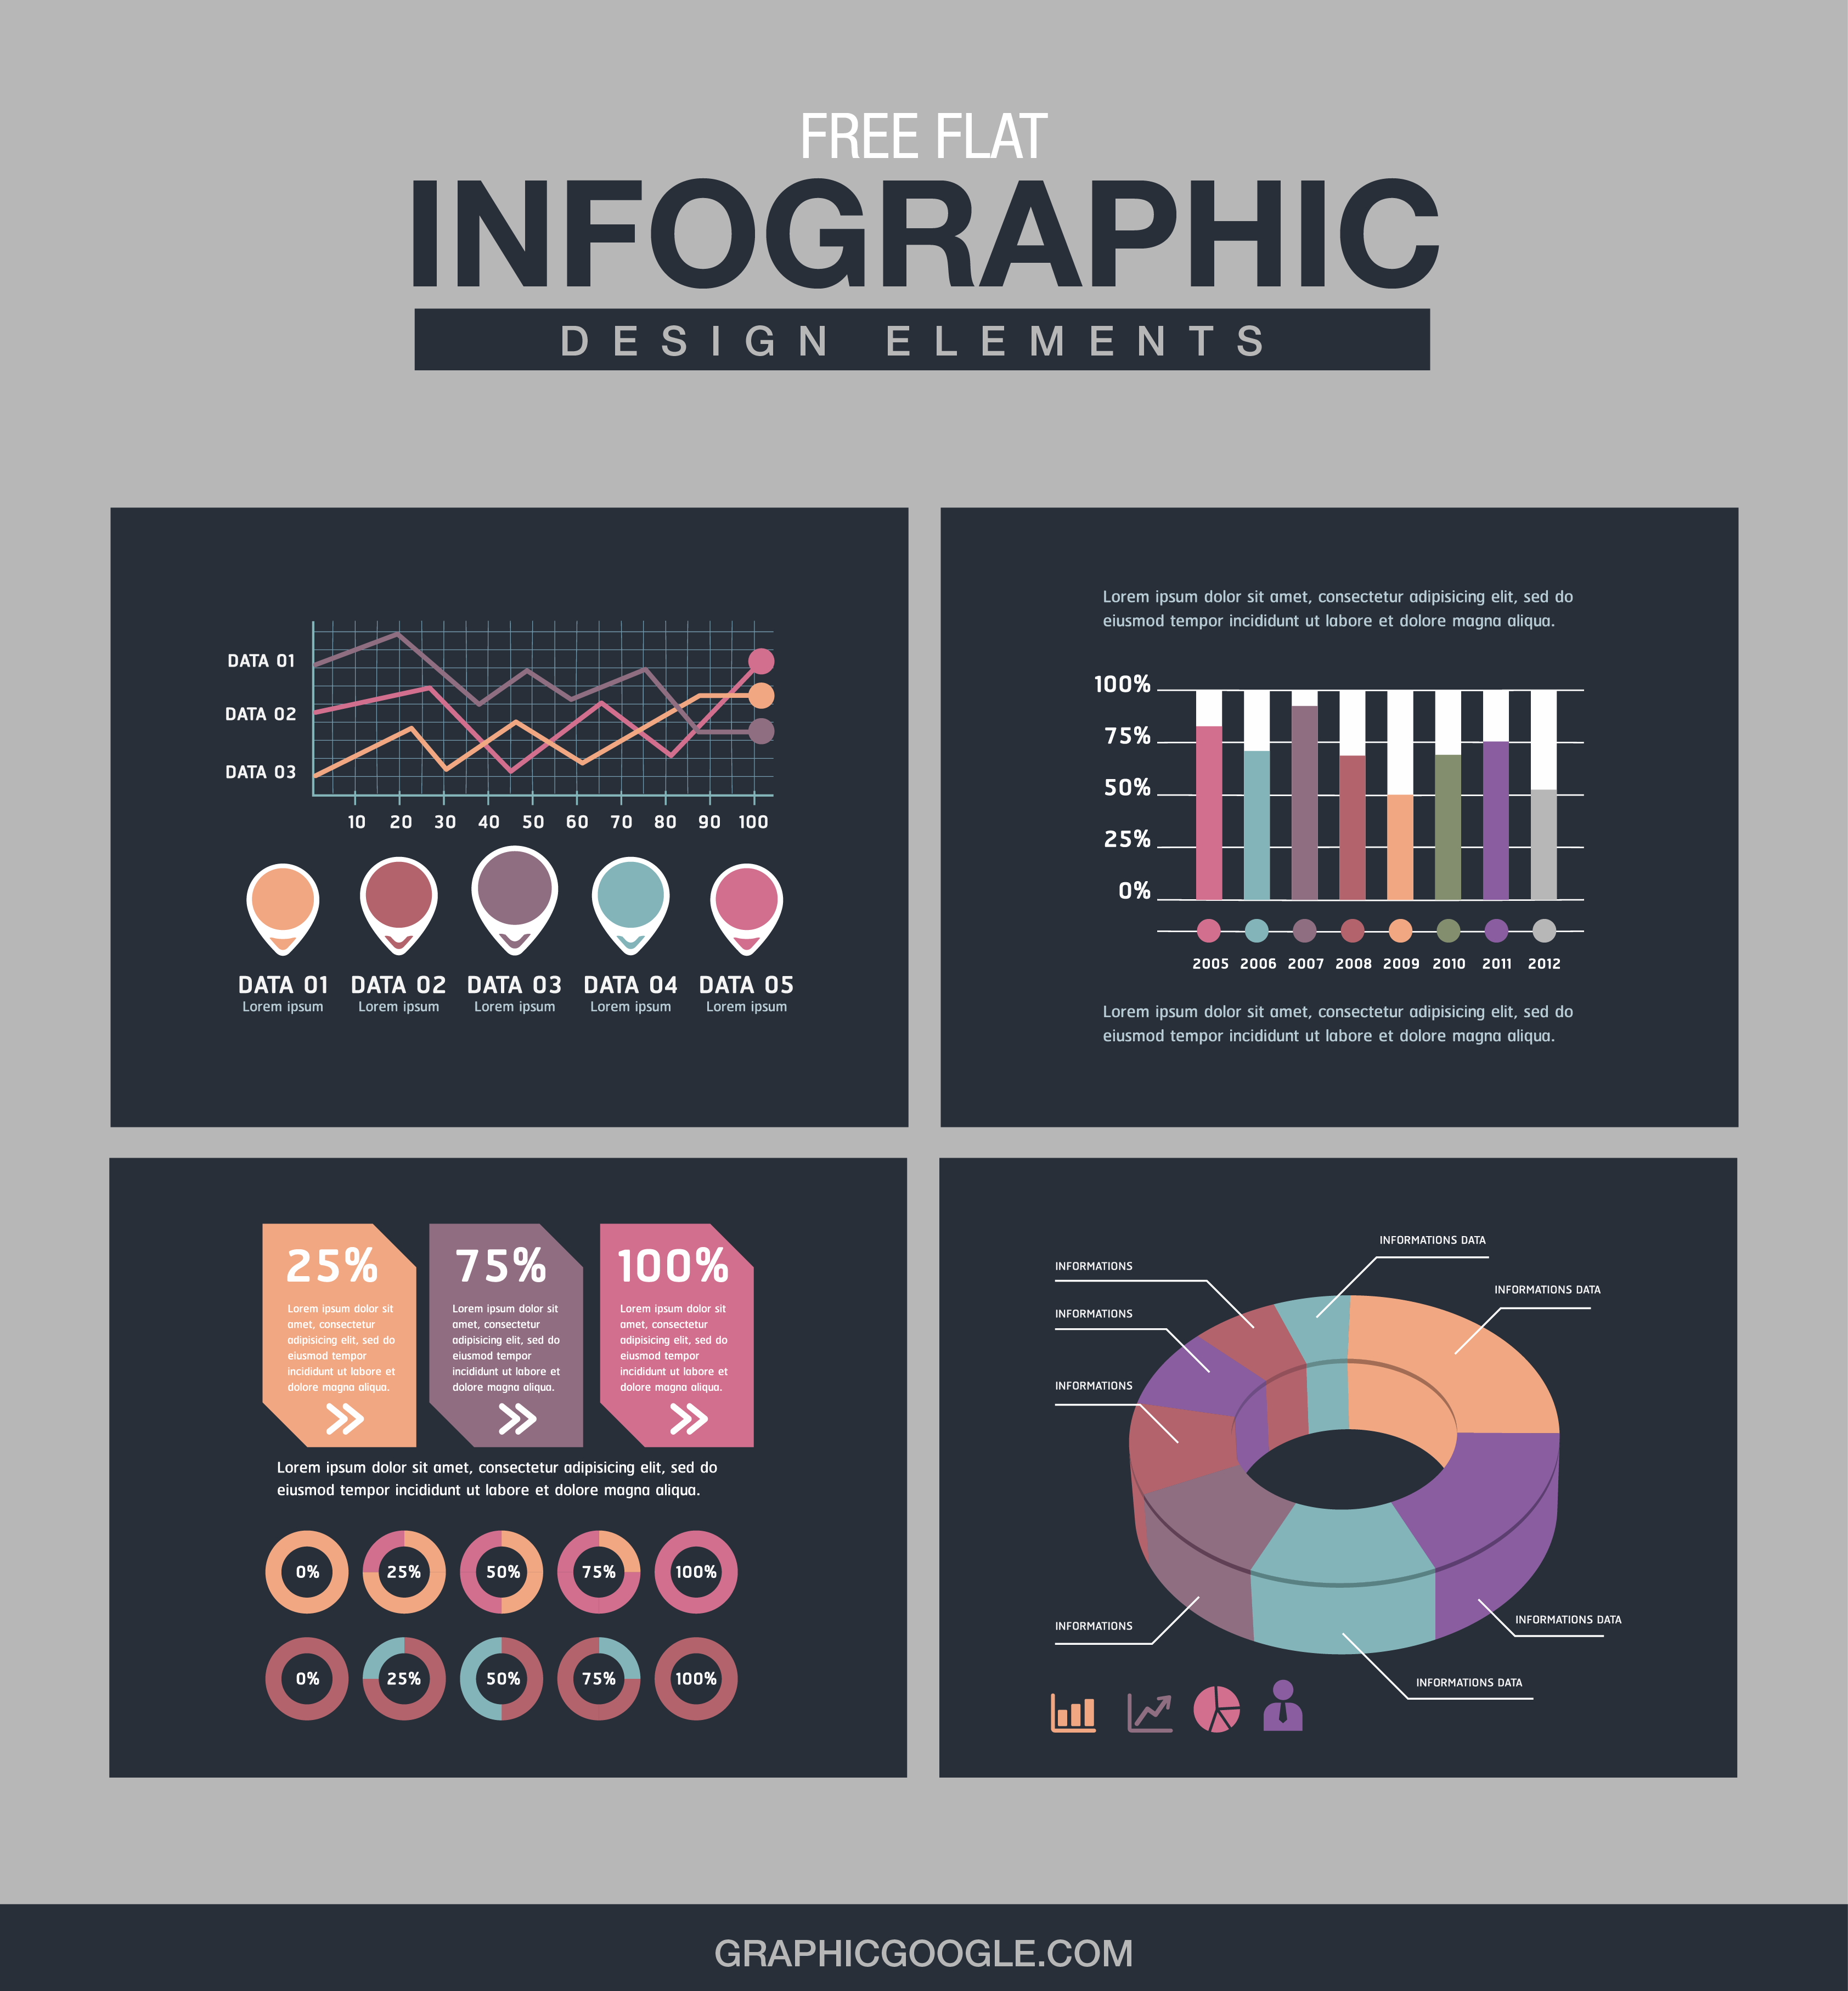 Top 5 Trends In Infographic Design Company To Watch. - Creative Infographic Design Company ...